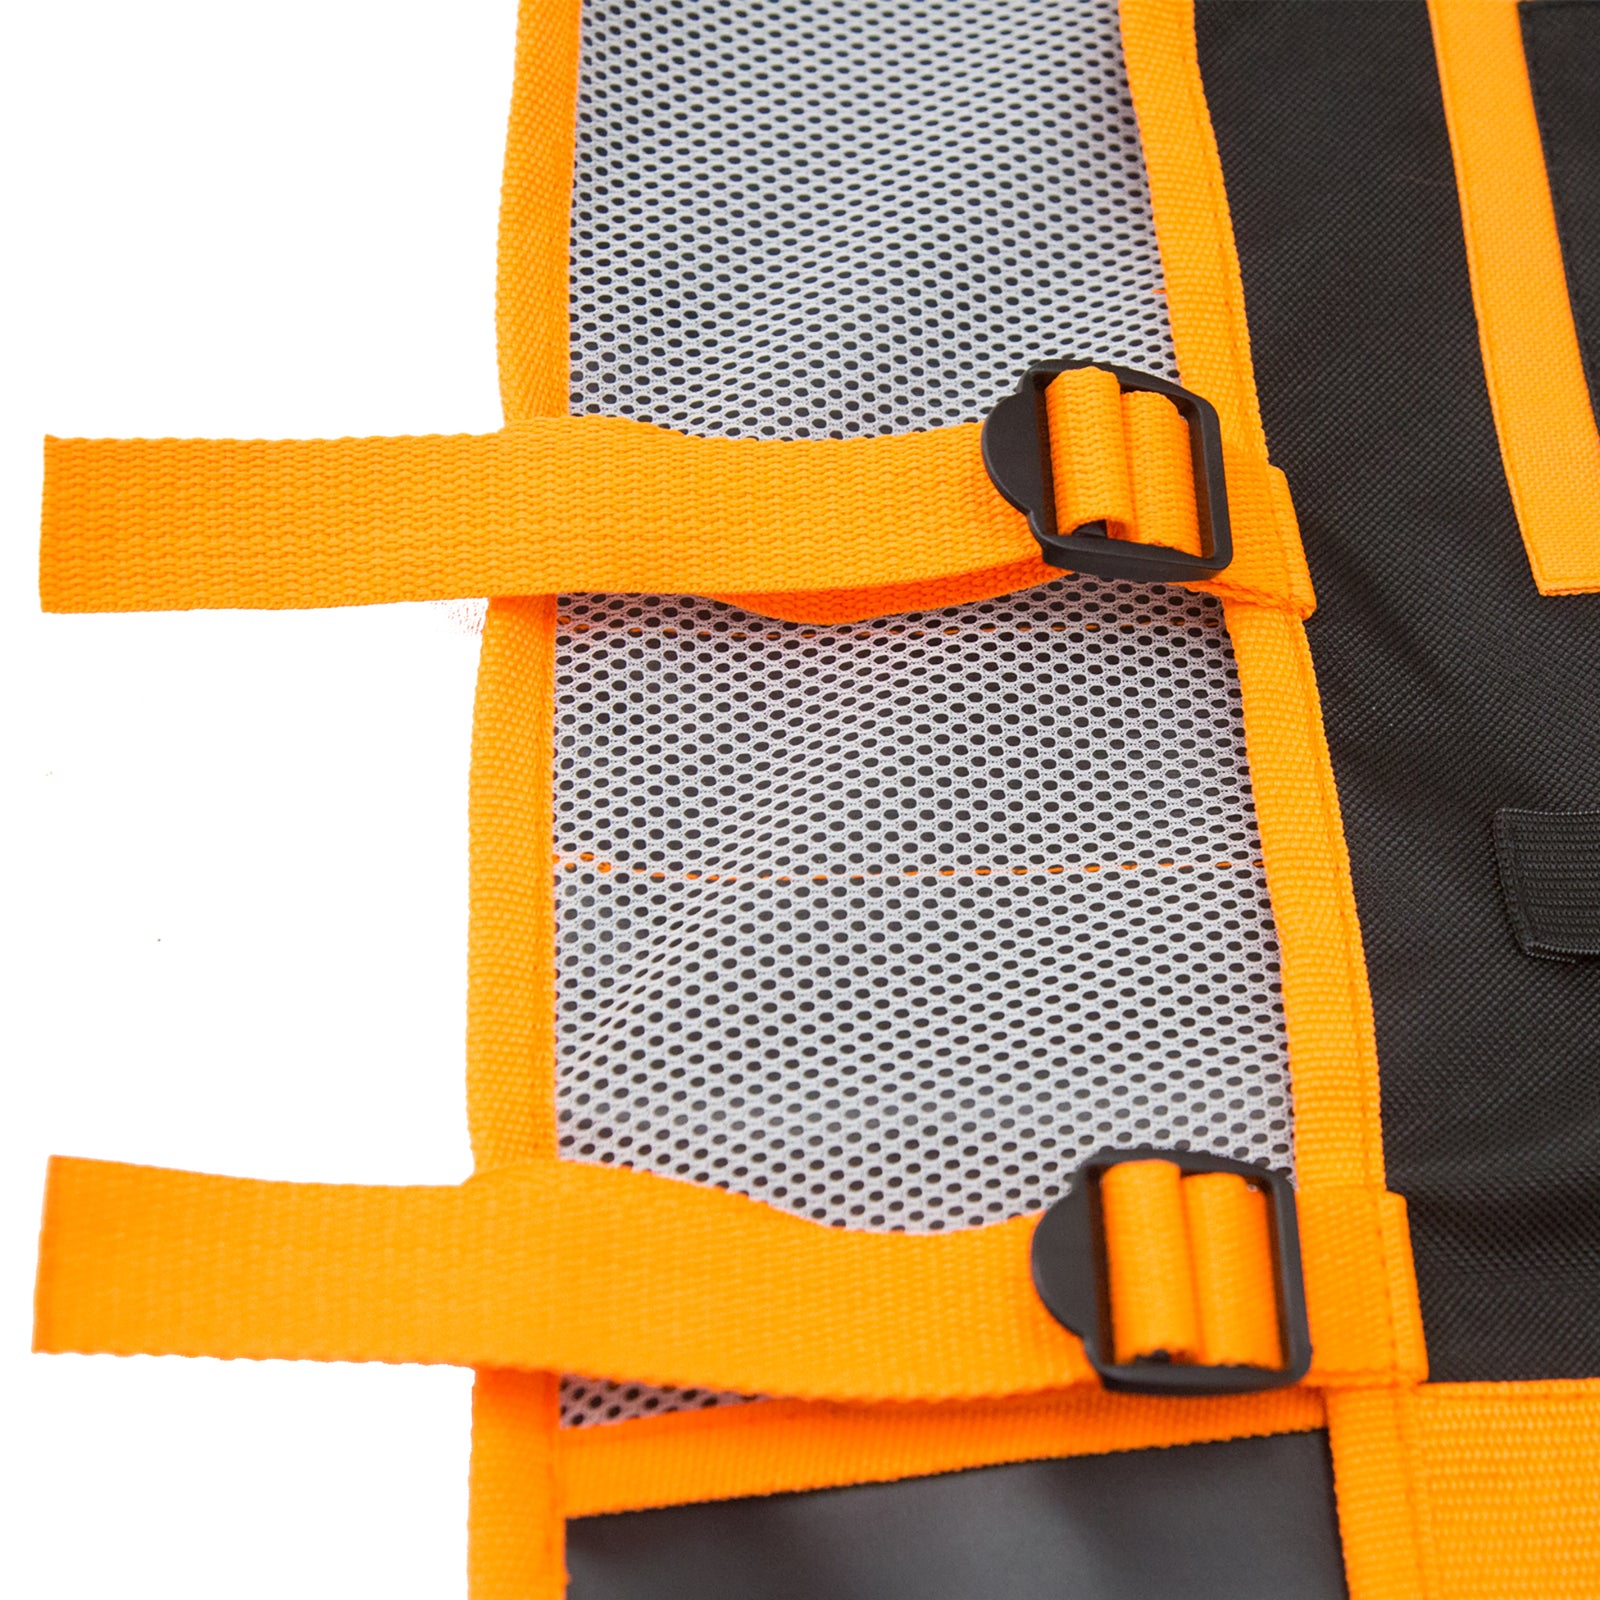 Close up to show the 2 adjustable side straps locates on each side of the tool vest for size adjustments